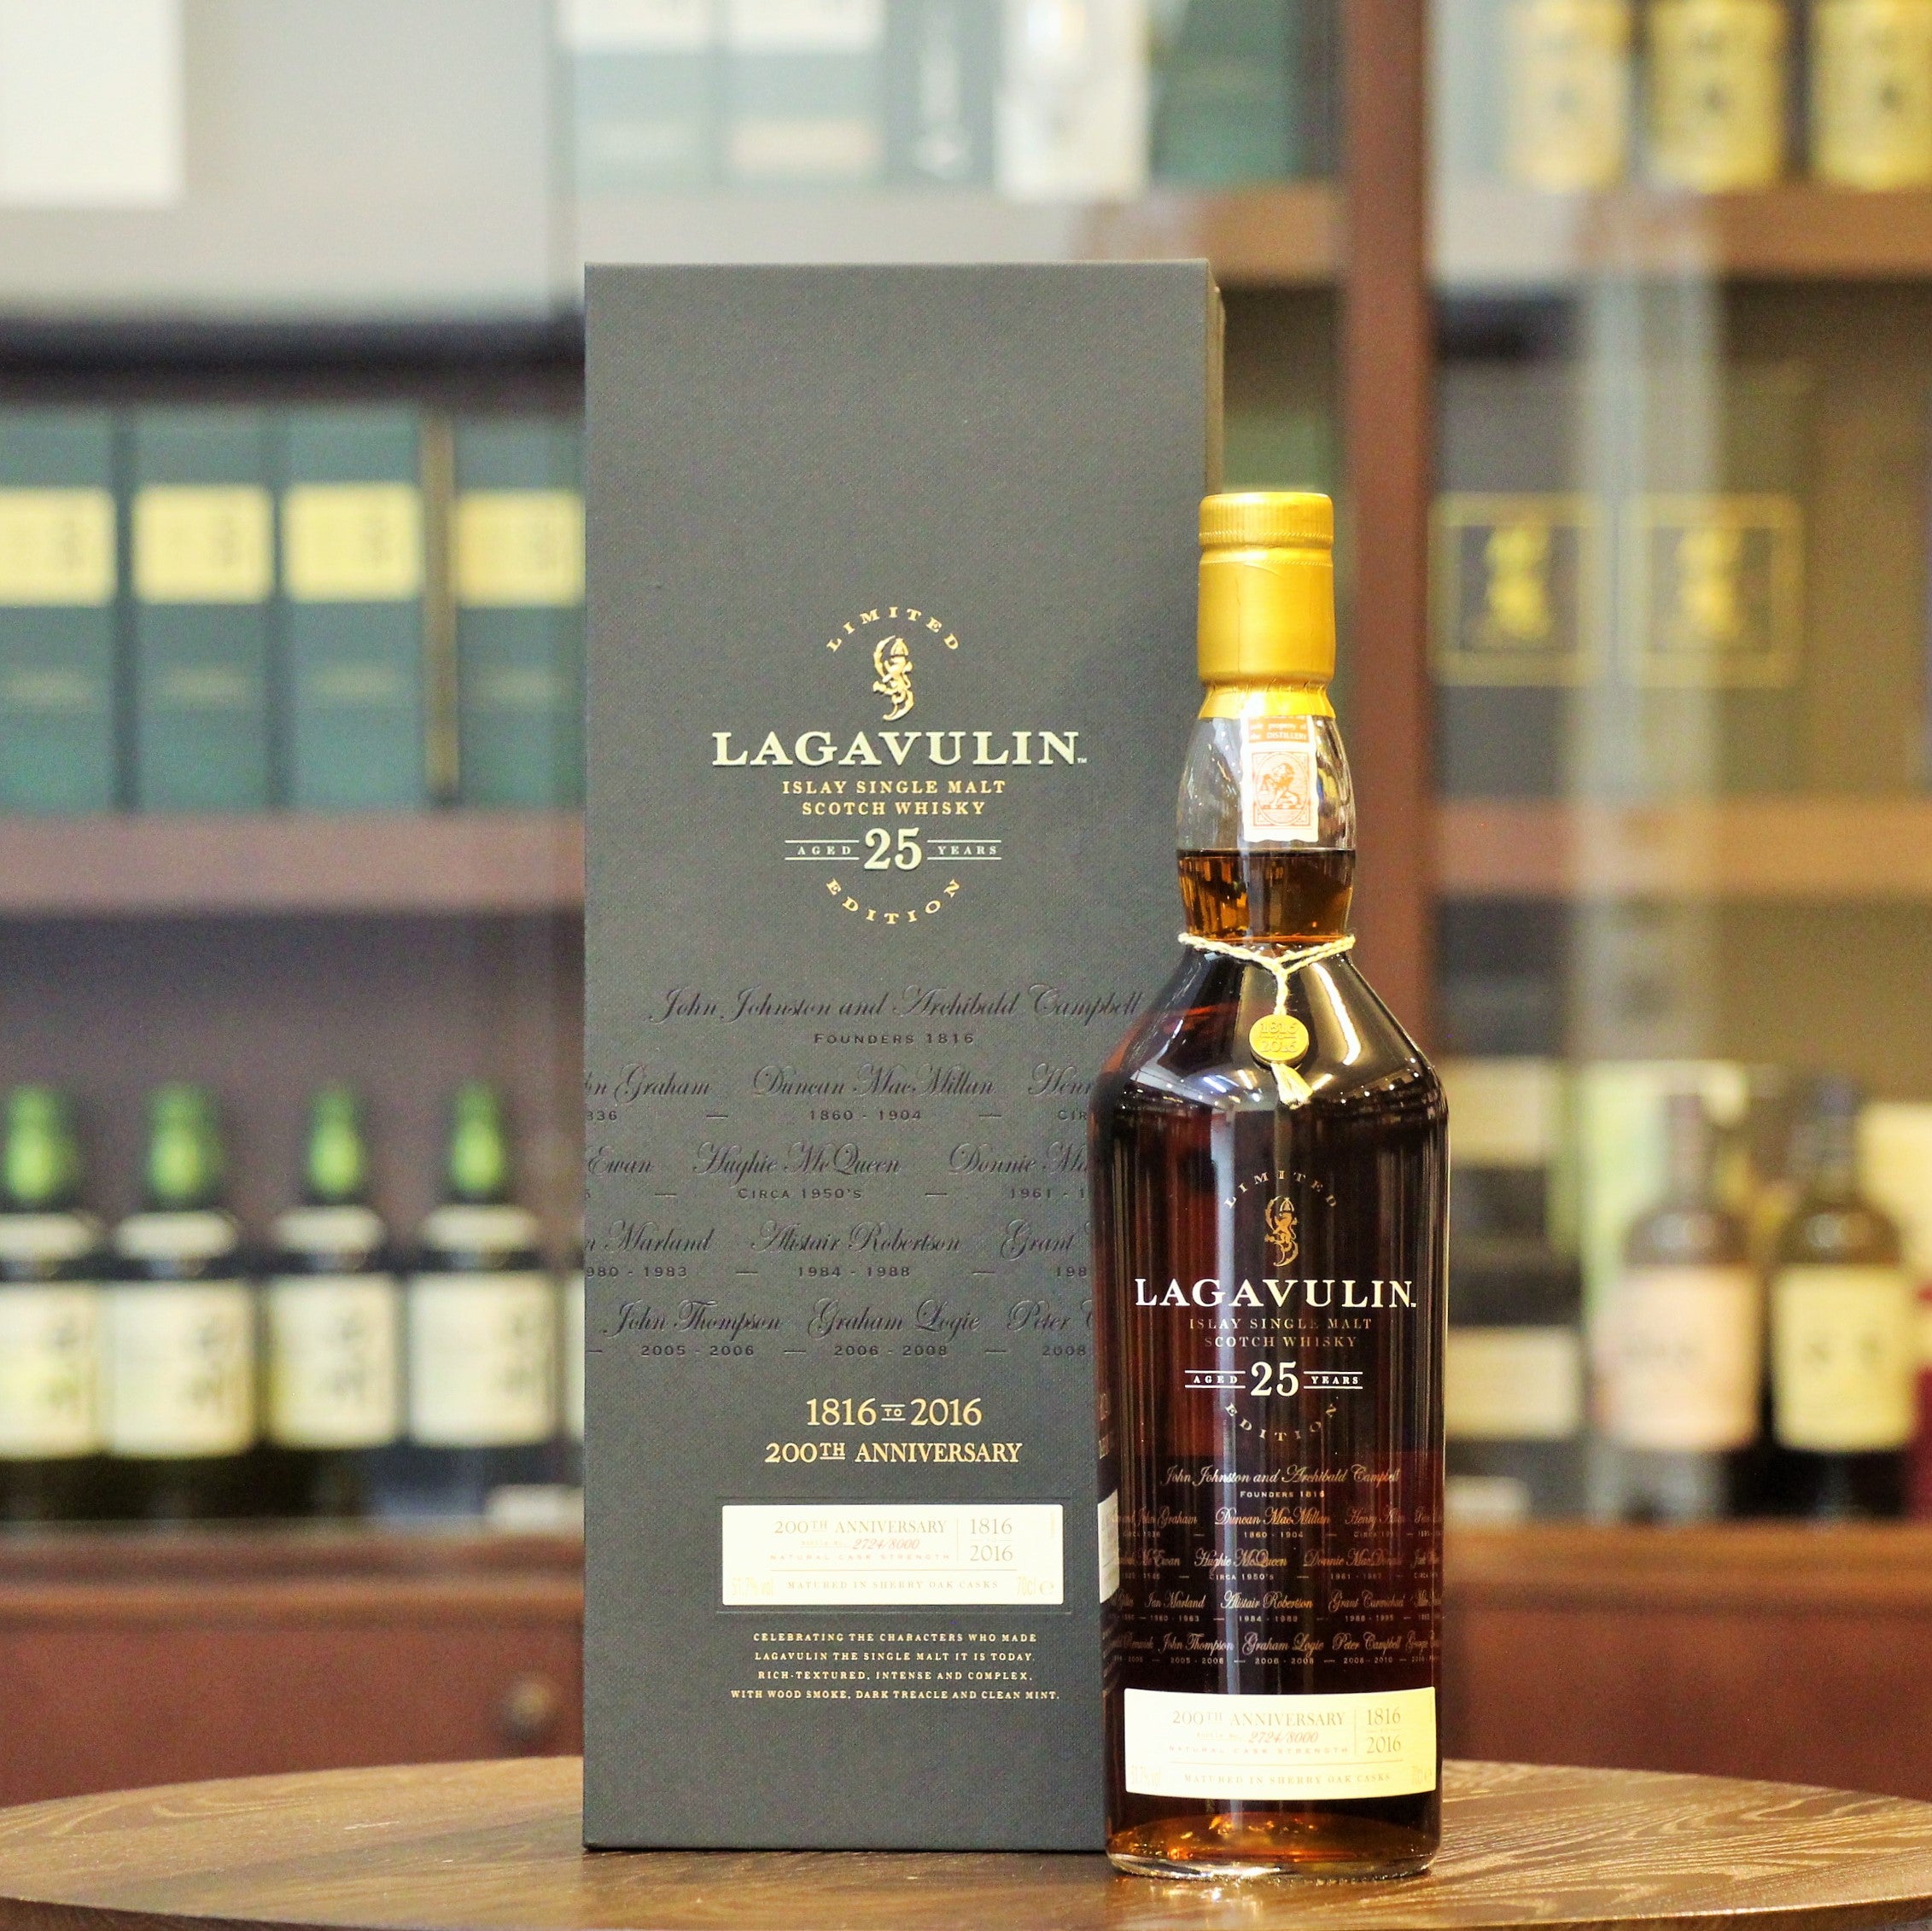 Lagavulin 25 Years Old 200th Anniversary Limited Edition Single Malt Scotch Whisky